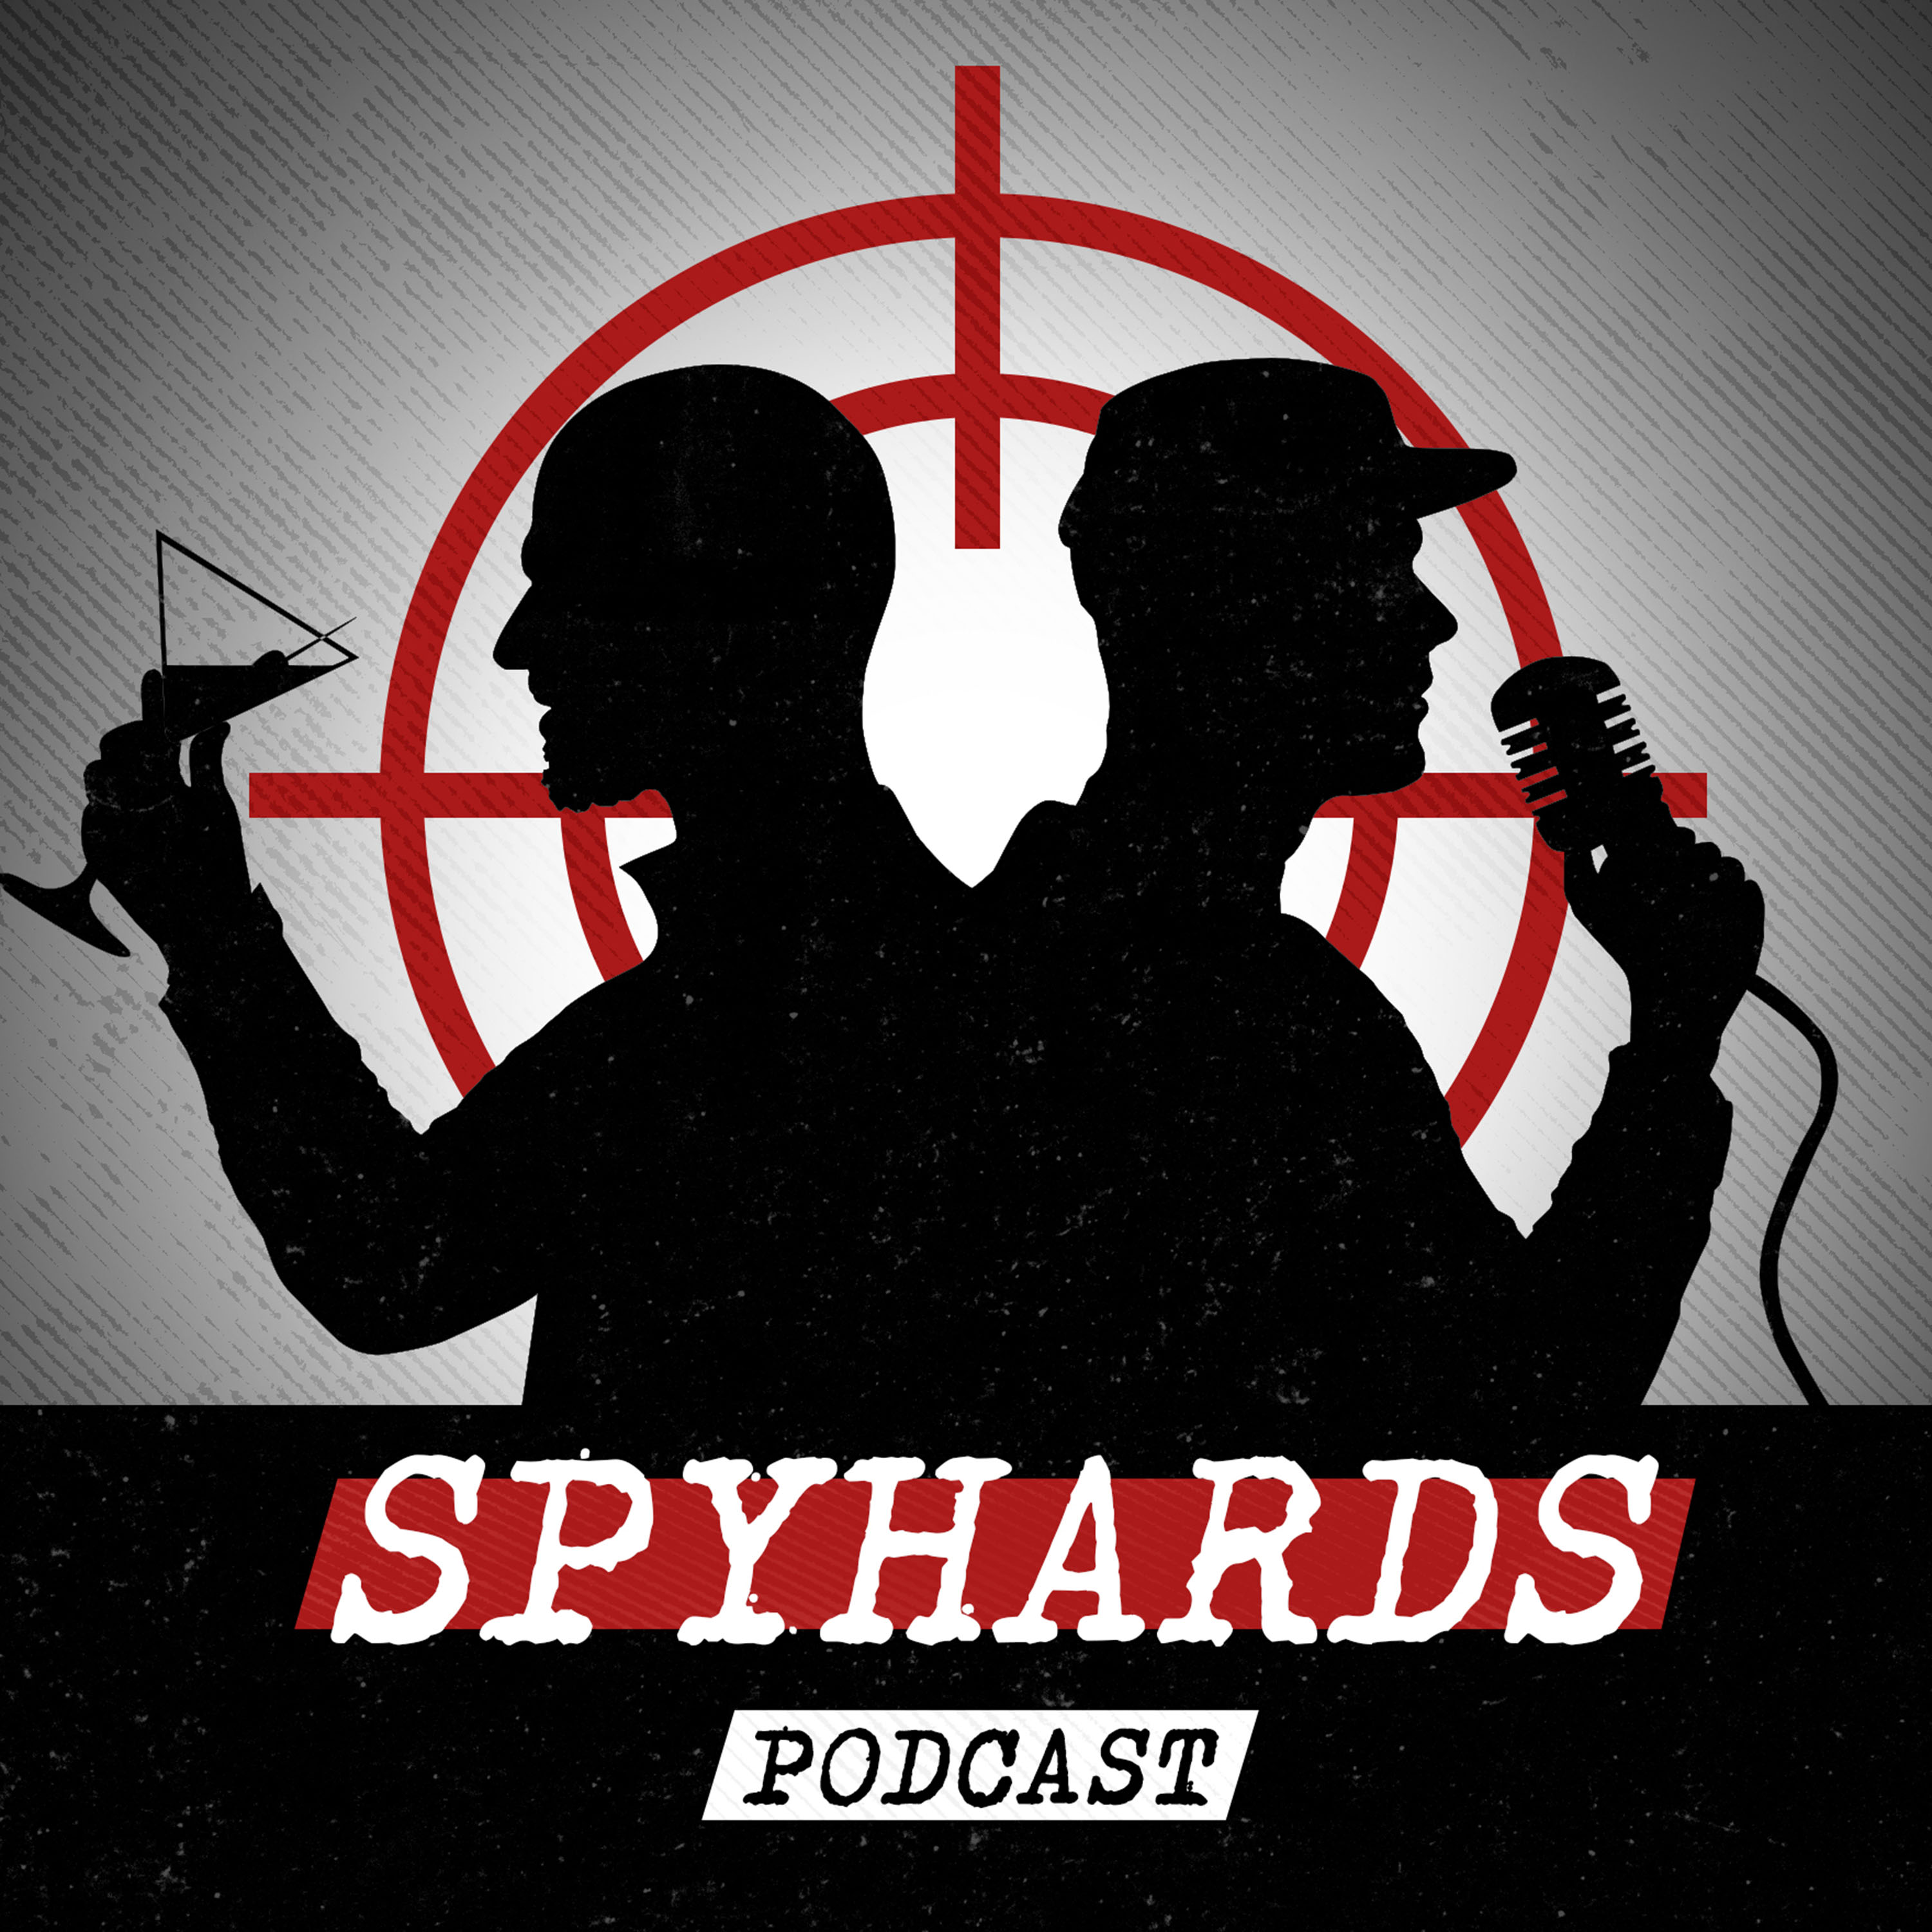 A highlight from SpyMaster Interview #10 - Jeff Kanew